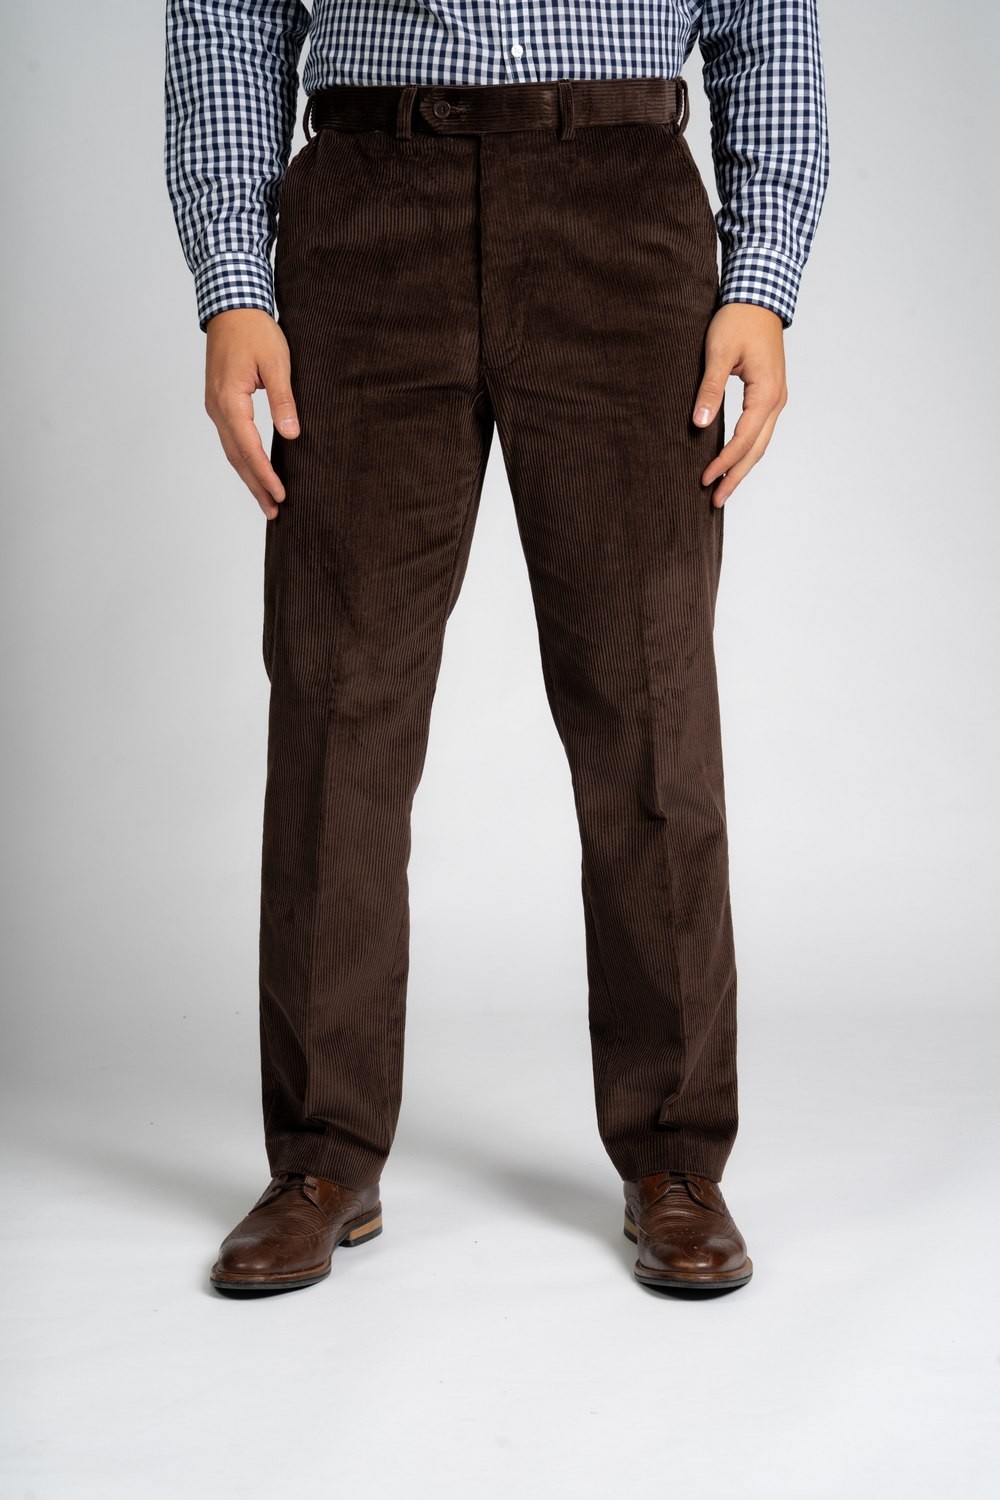 Carabou Cord Trousers GCO Brown Waist 46S